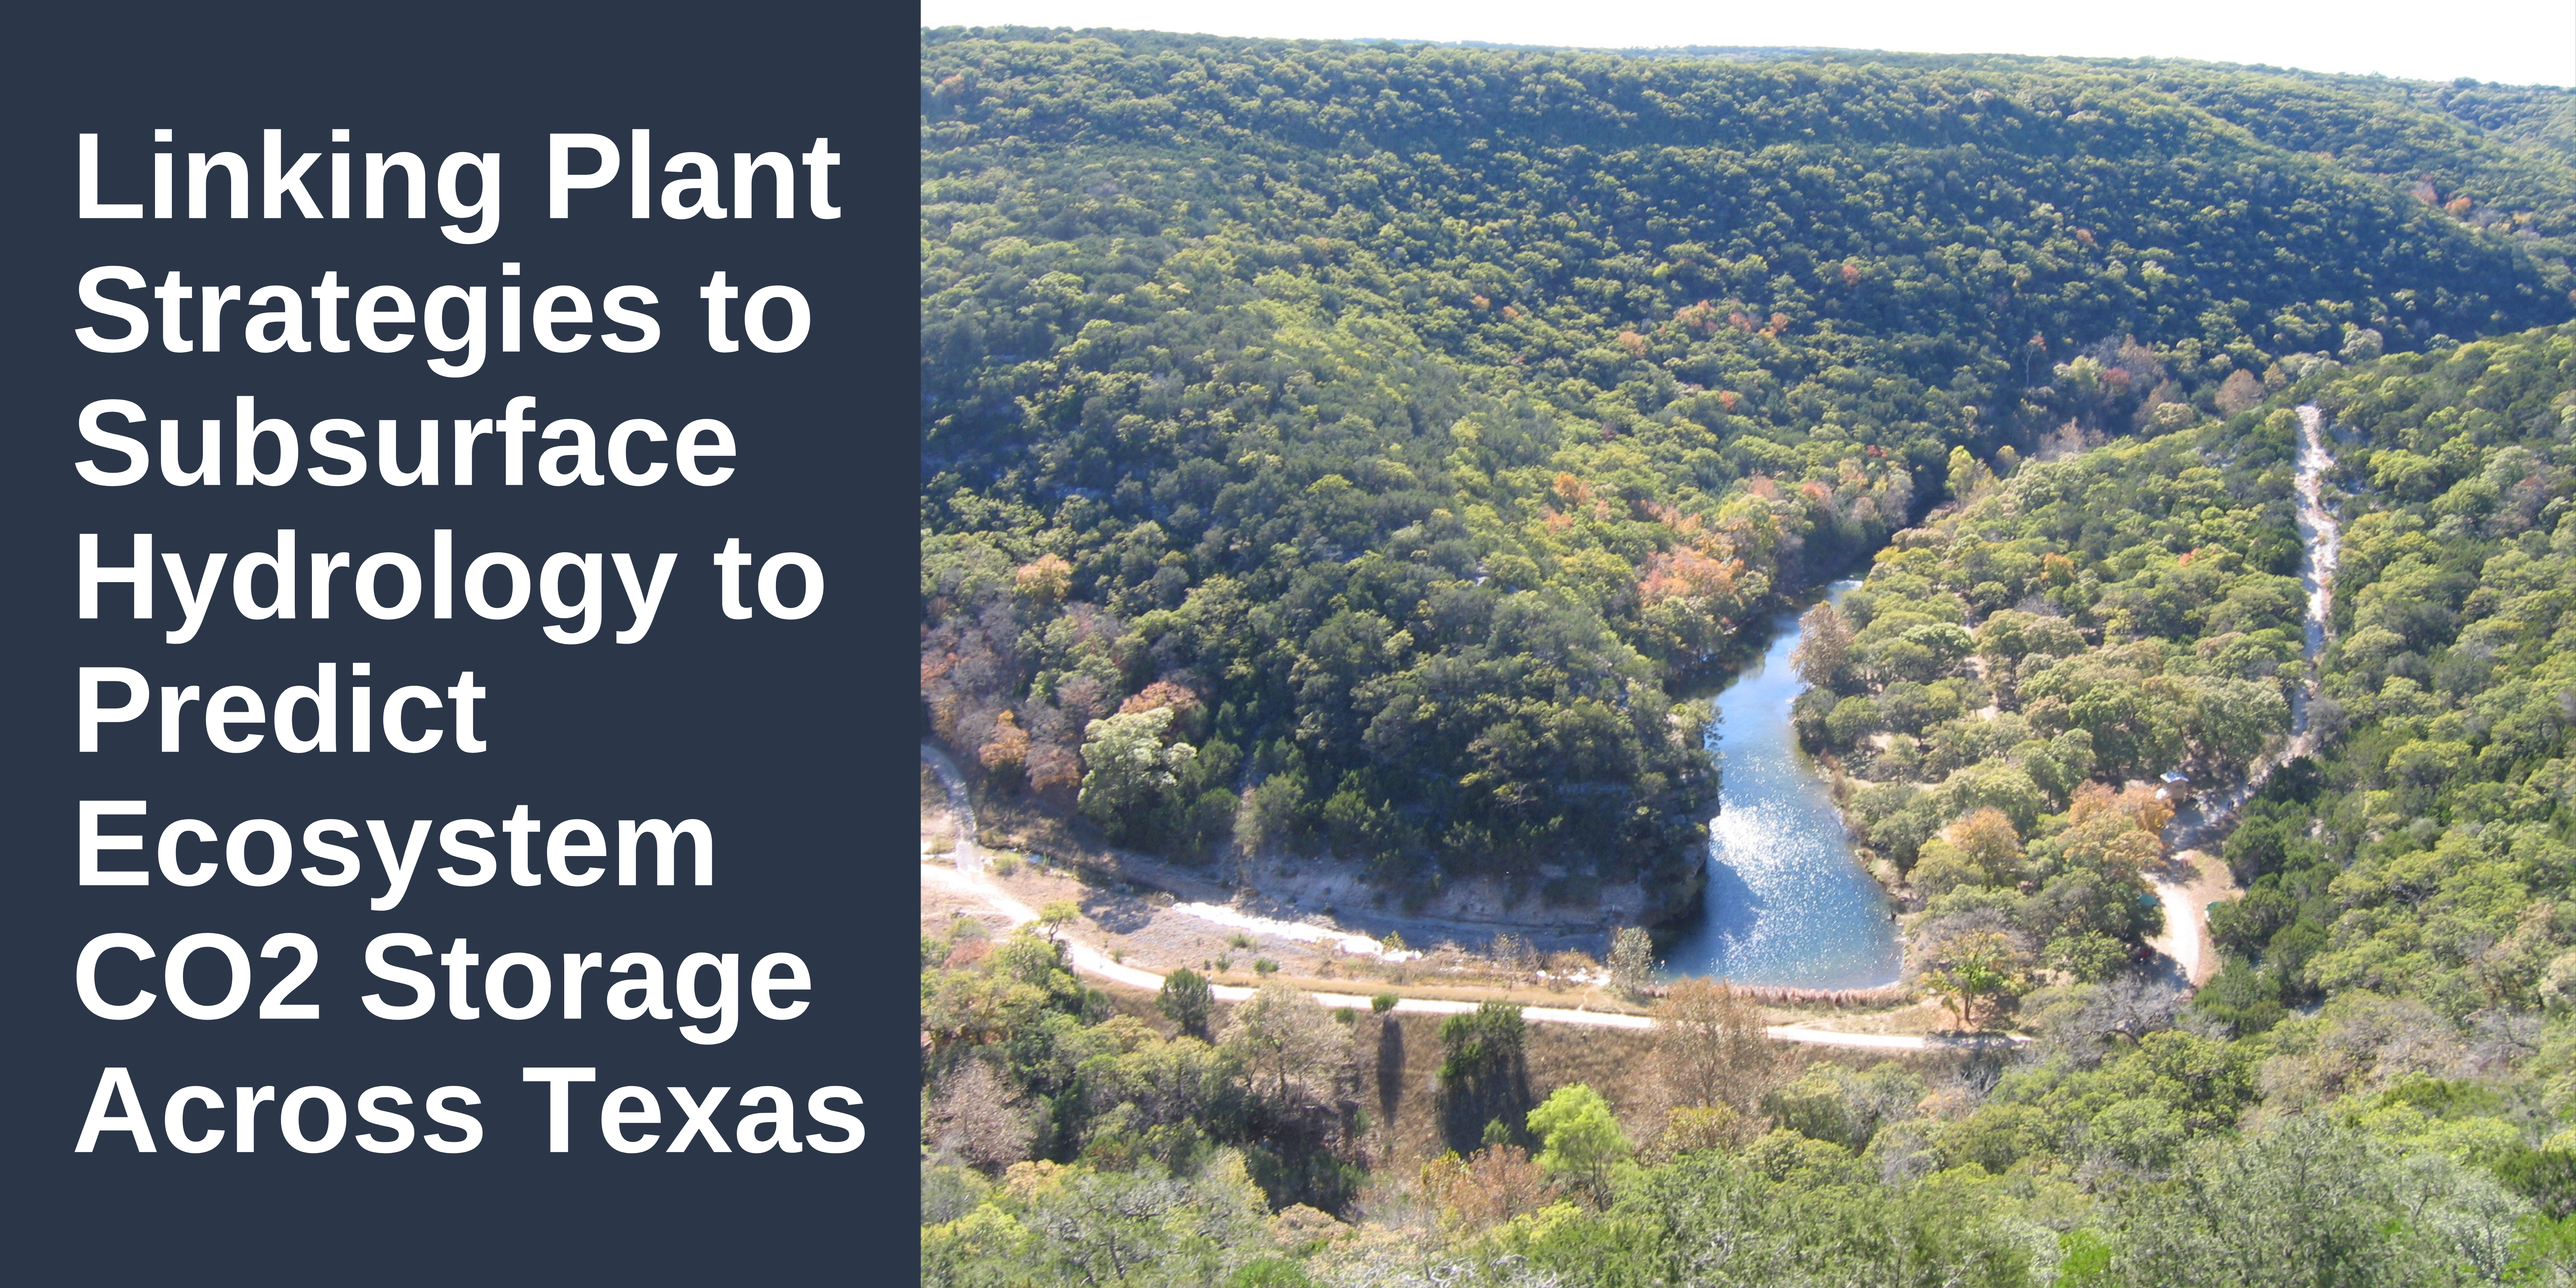 Linking Plant Strategies to Subsurface Hydrology to Predict Ecosystem CO2 Storage Across Texas